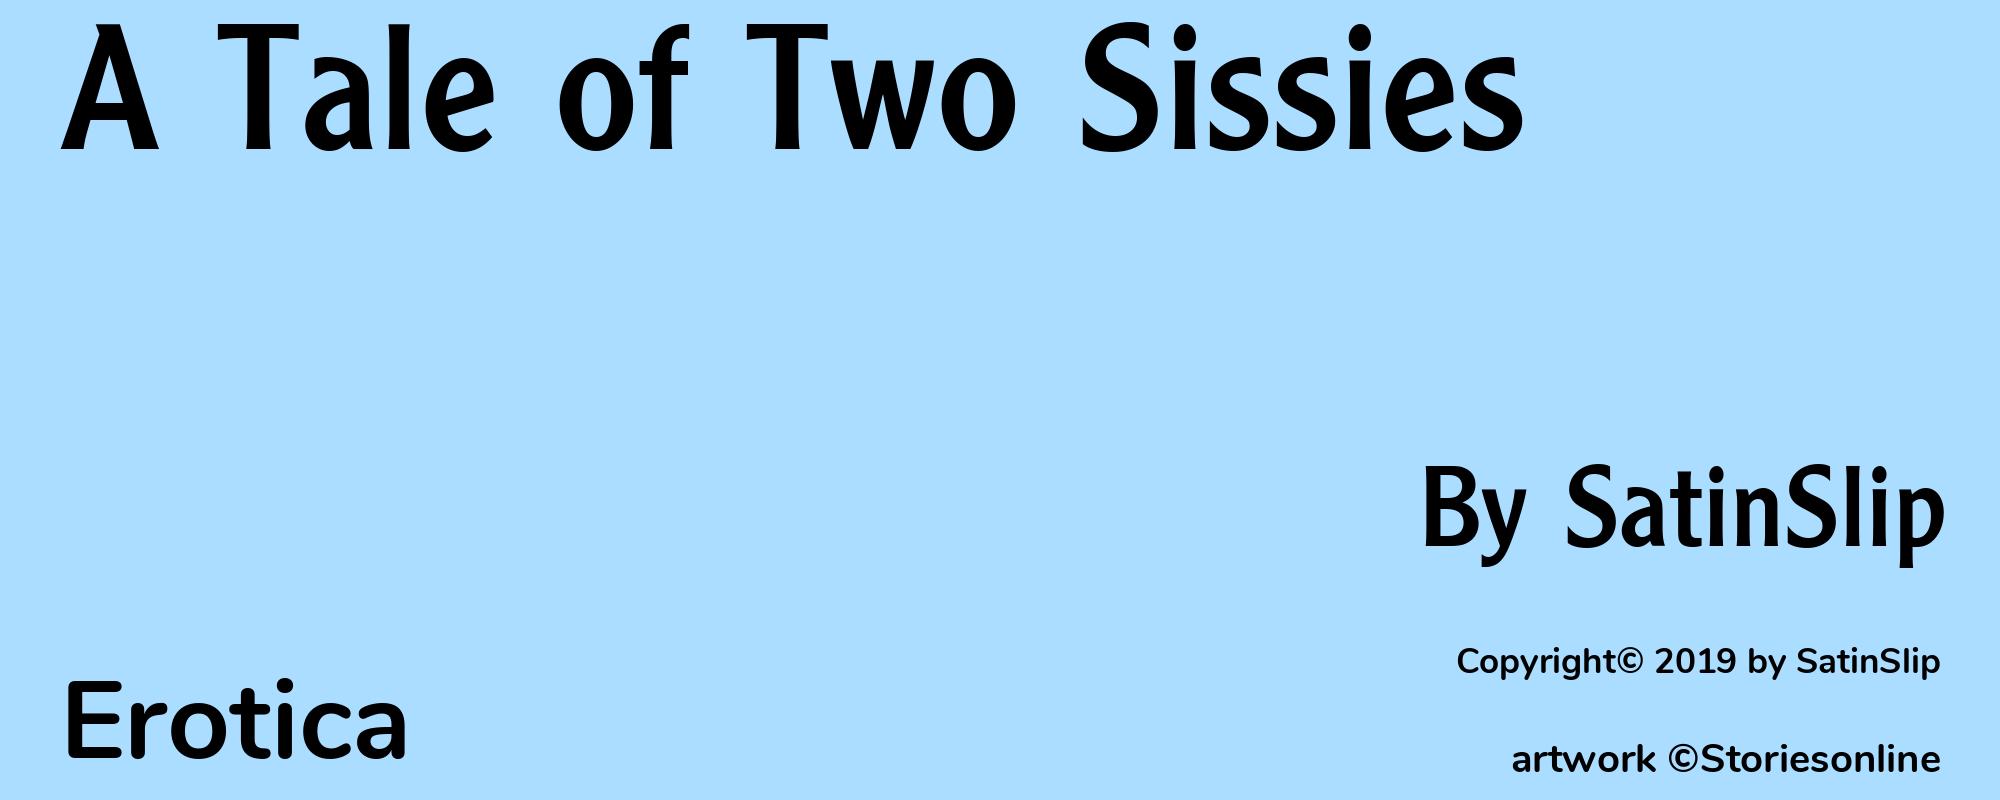 A Tale of Two Sissies - Cover